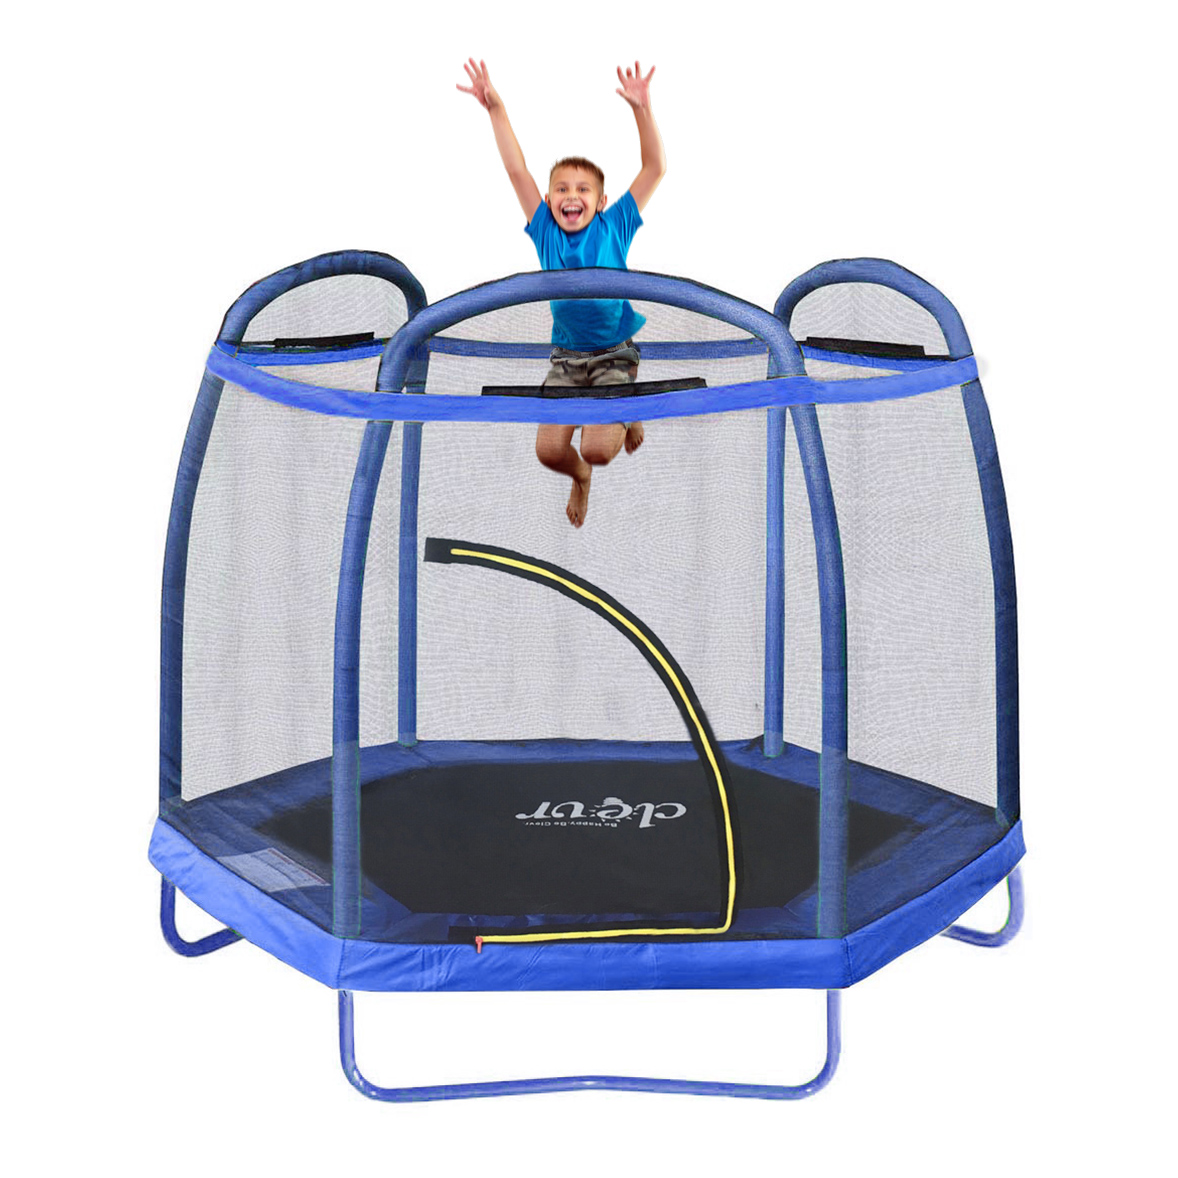 Clevr 7 Ft. Trampoline Bounce Jump Safety Enclosure Net W/ Spring Pad Blue